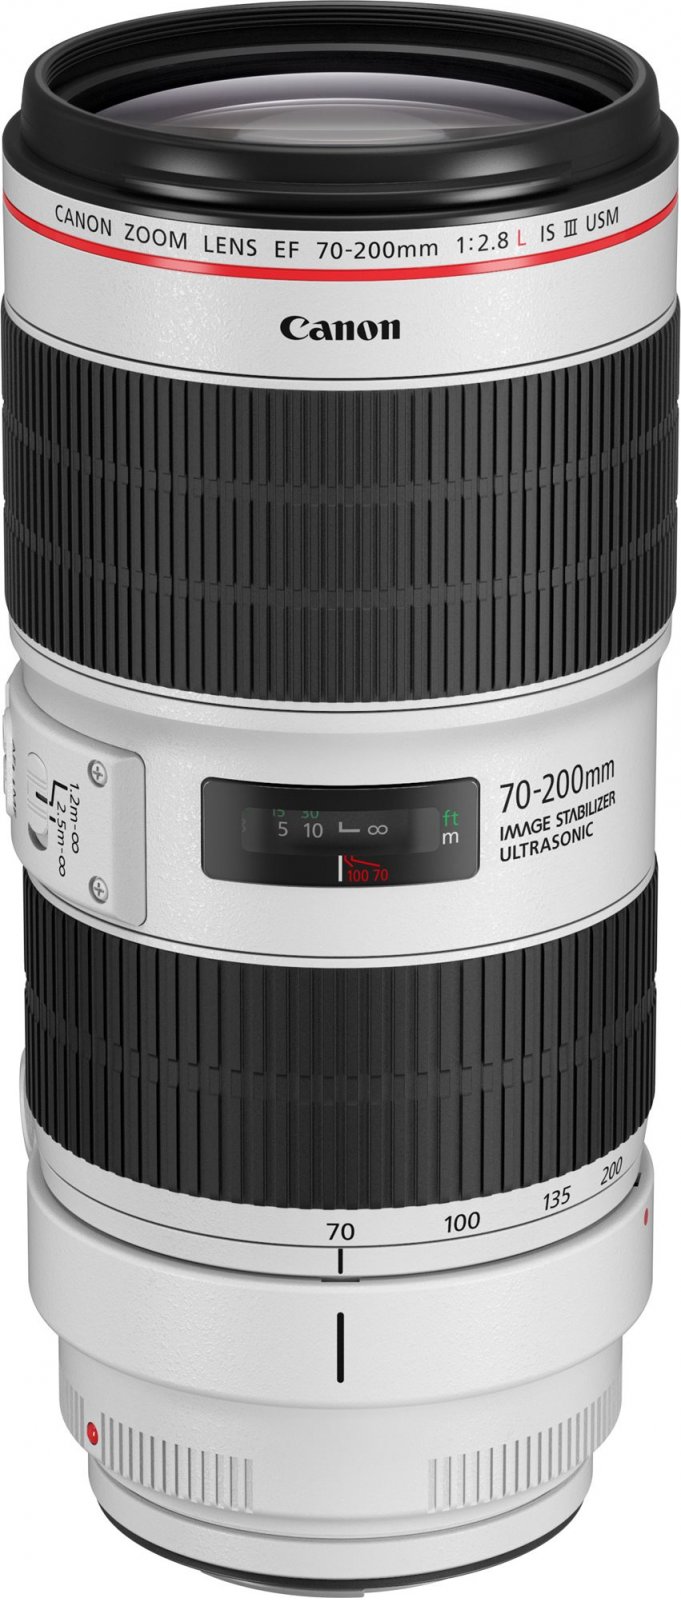 Canon EF 70-200 mm f/2.8 L IS III USM